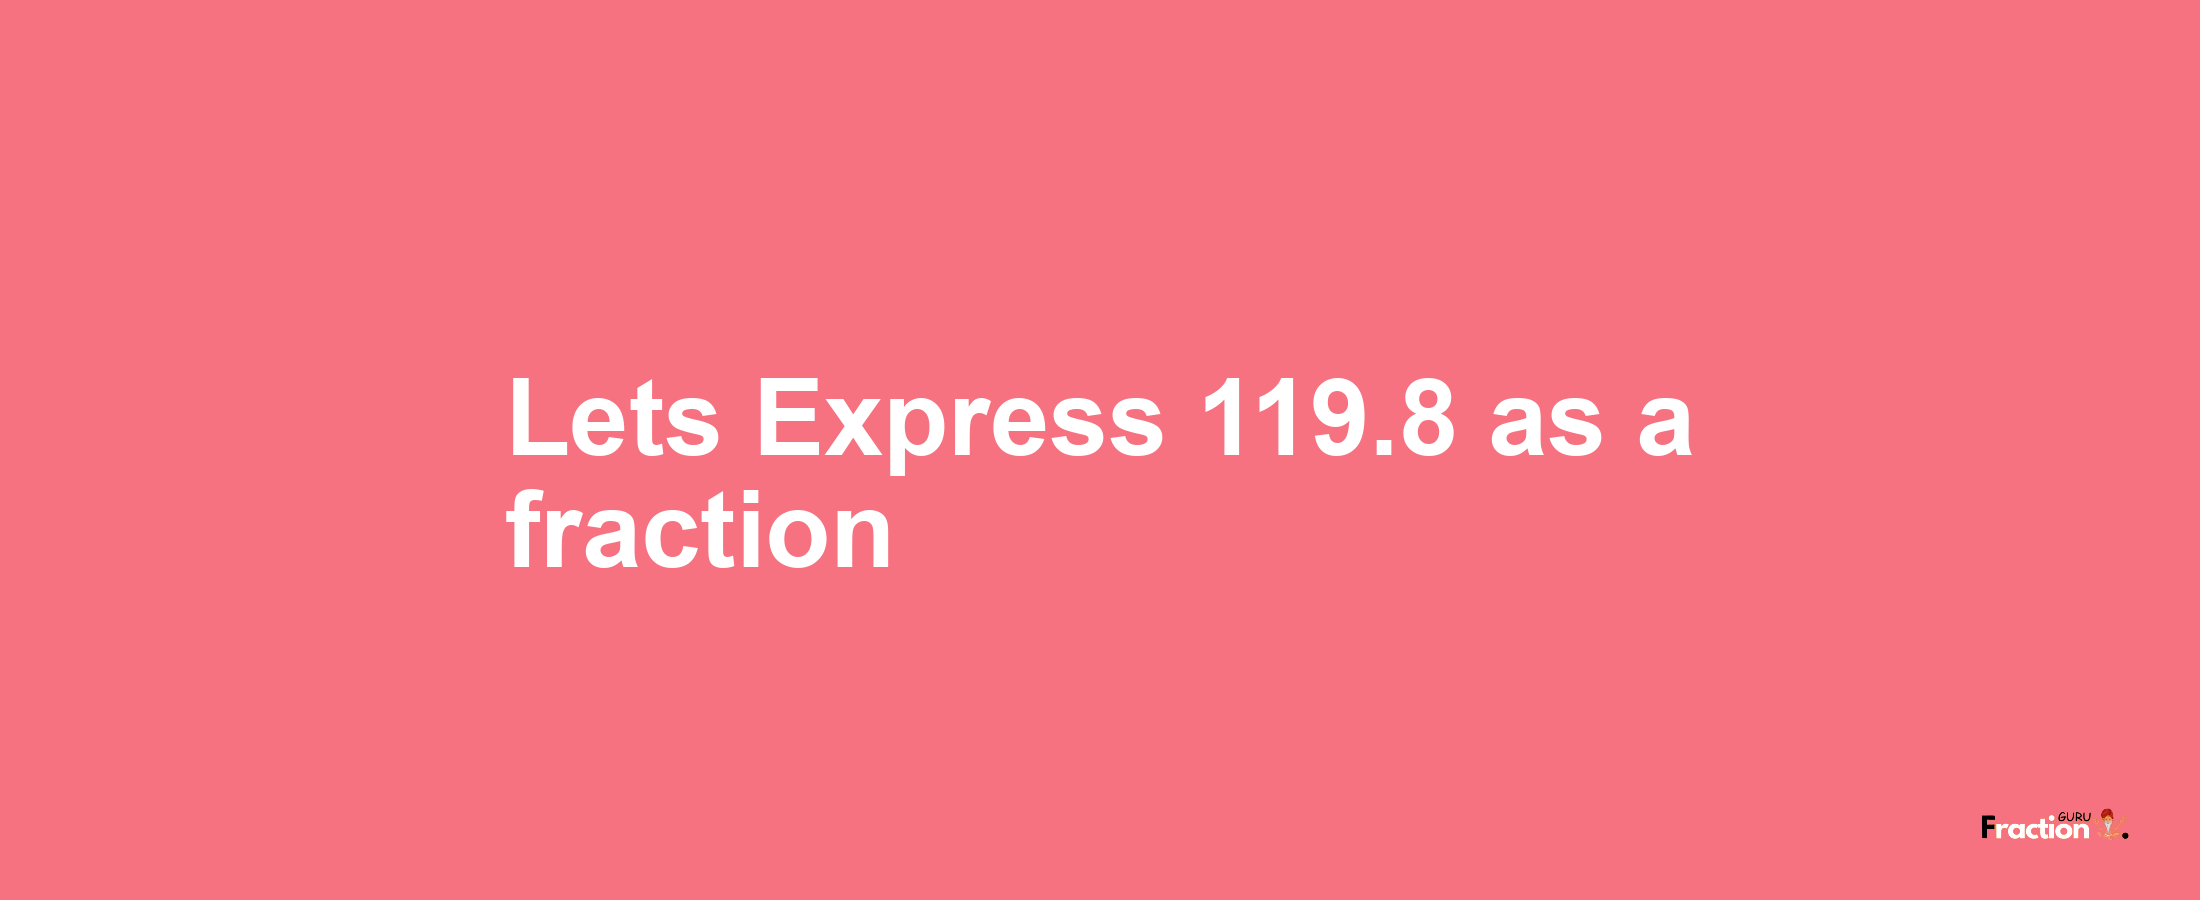 Lets Express 119.8 as afraction